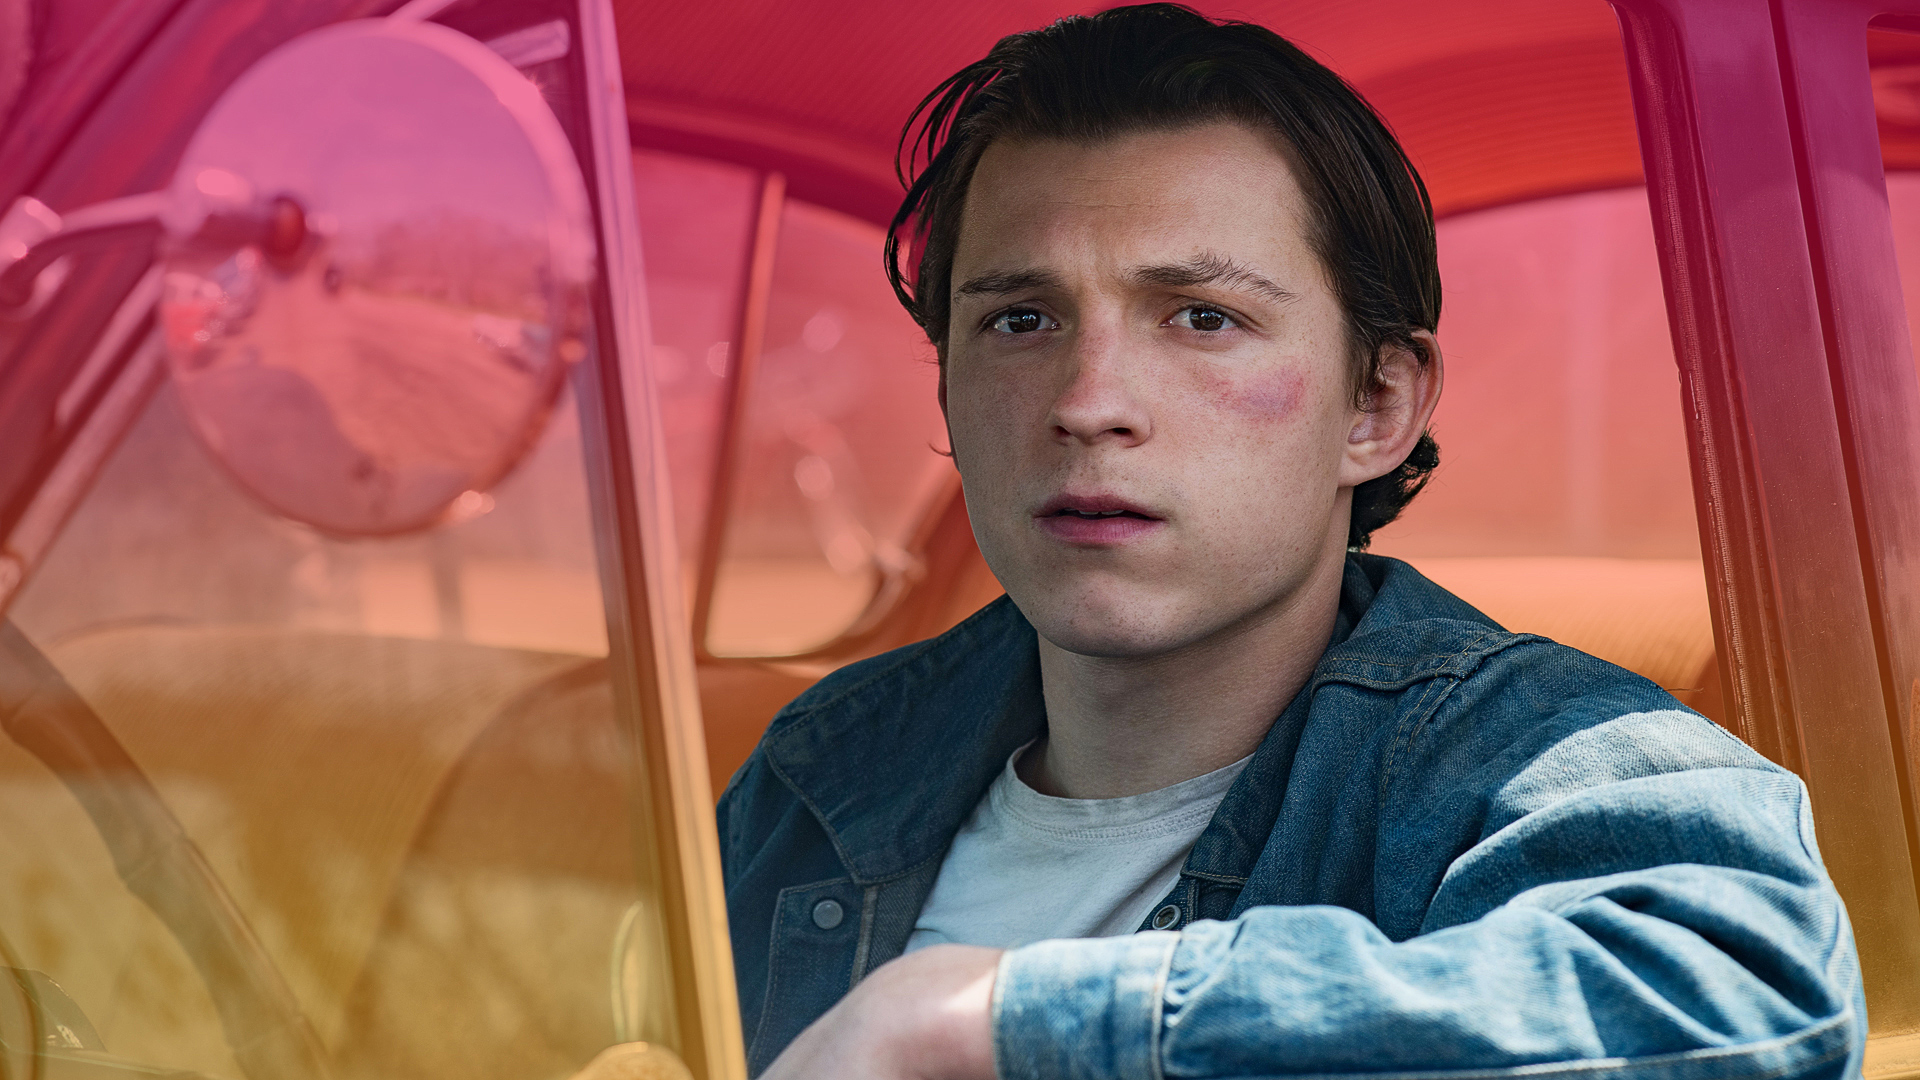 Tom Holland looks out of an open car window in the movie The Devil All The Time